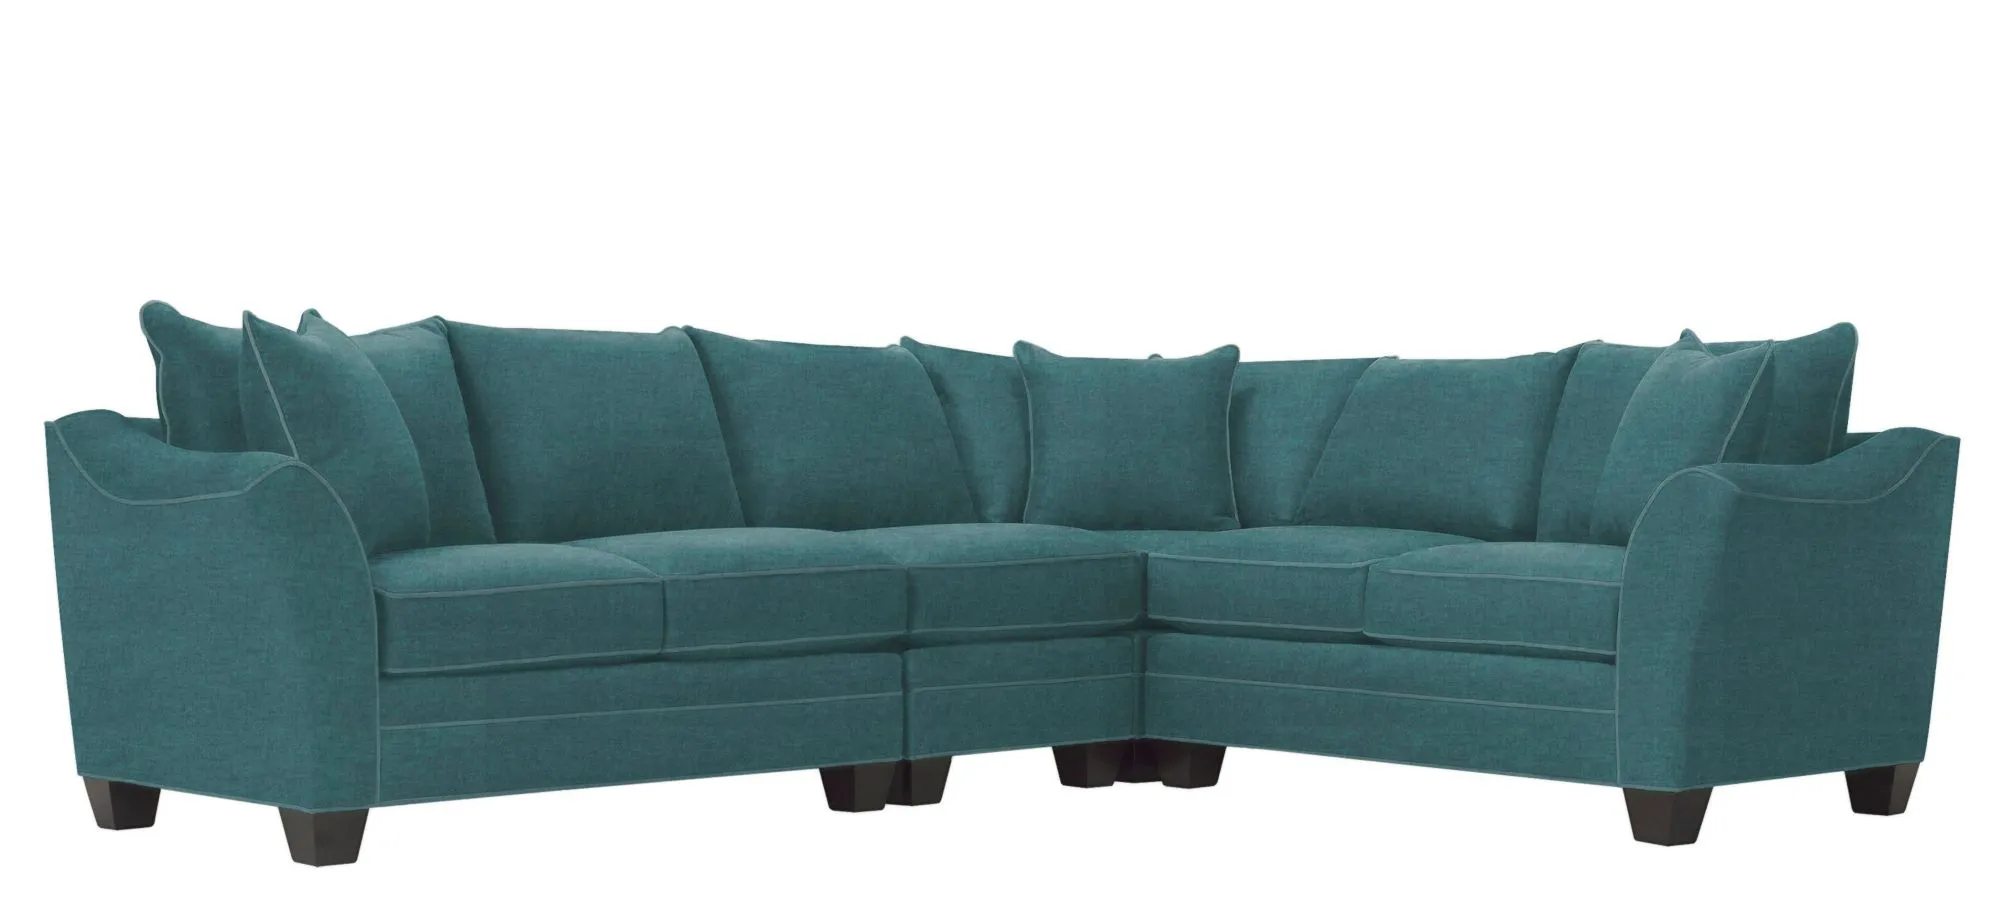 Foresthill 4-pc. Loveseat Sectional Sofa in Santa Rosa Turquoise by H.M. Richards